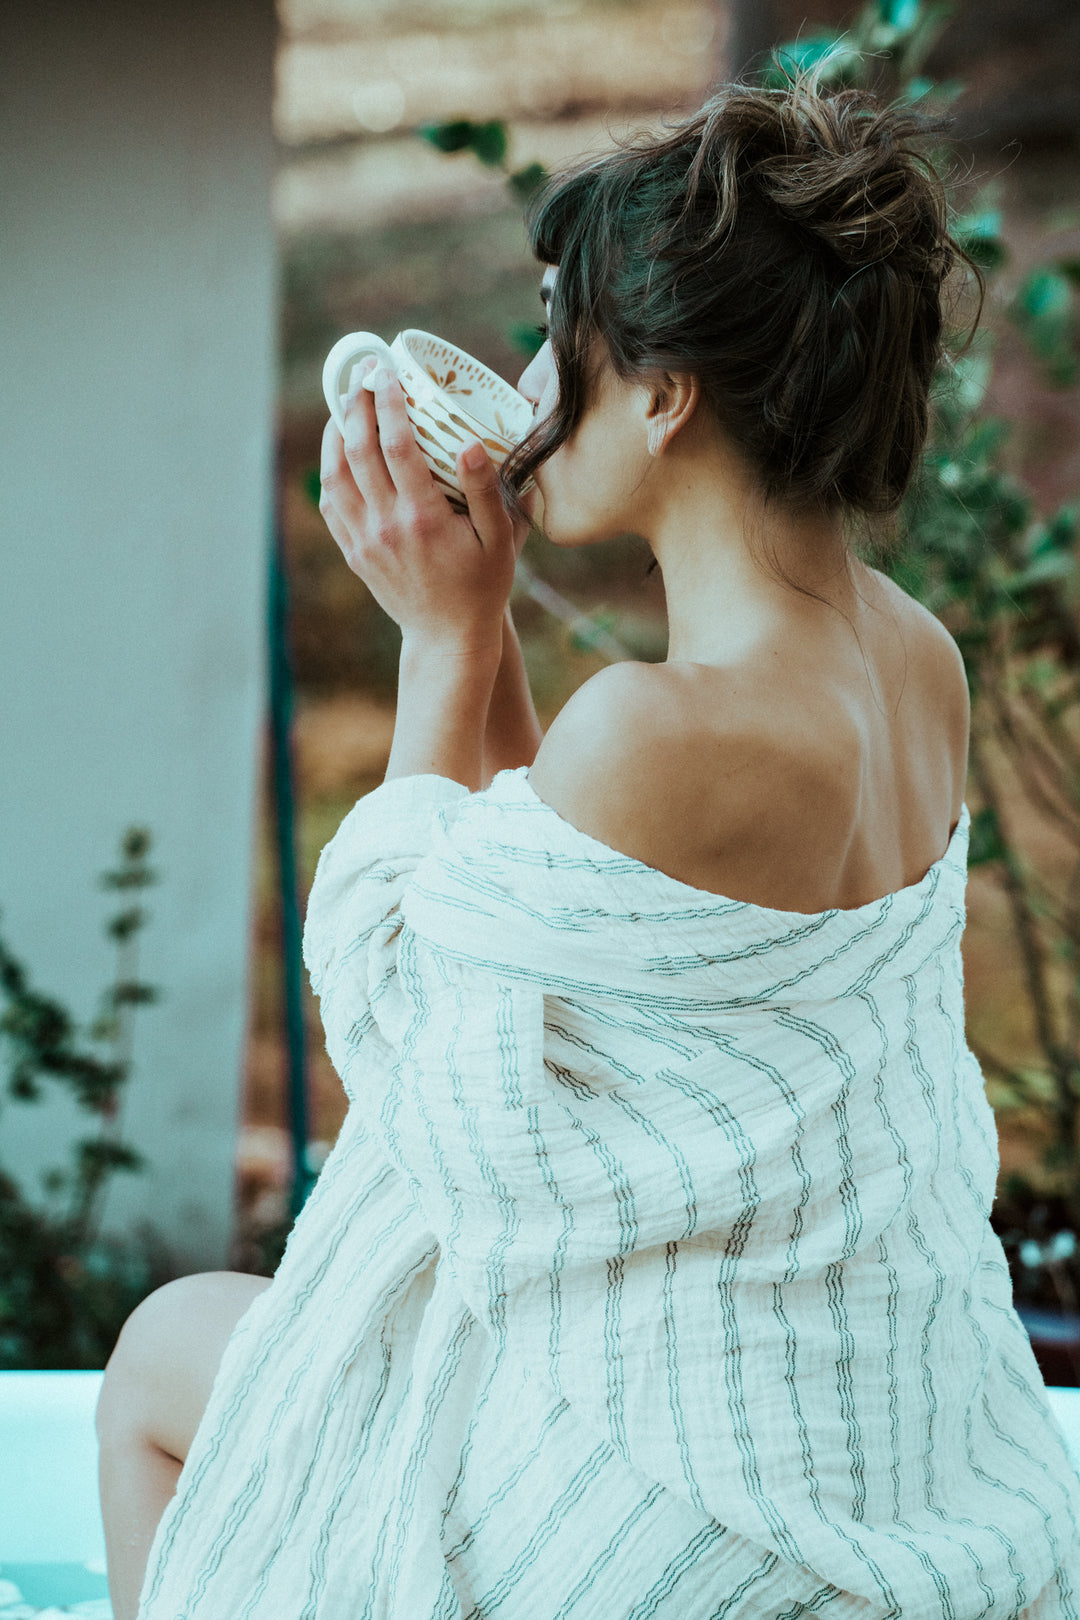 Back of woman wearing striped robe that is loosely wrapped and falling off shoulders.